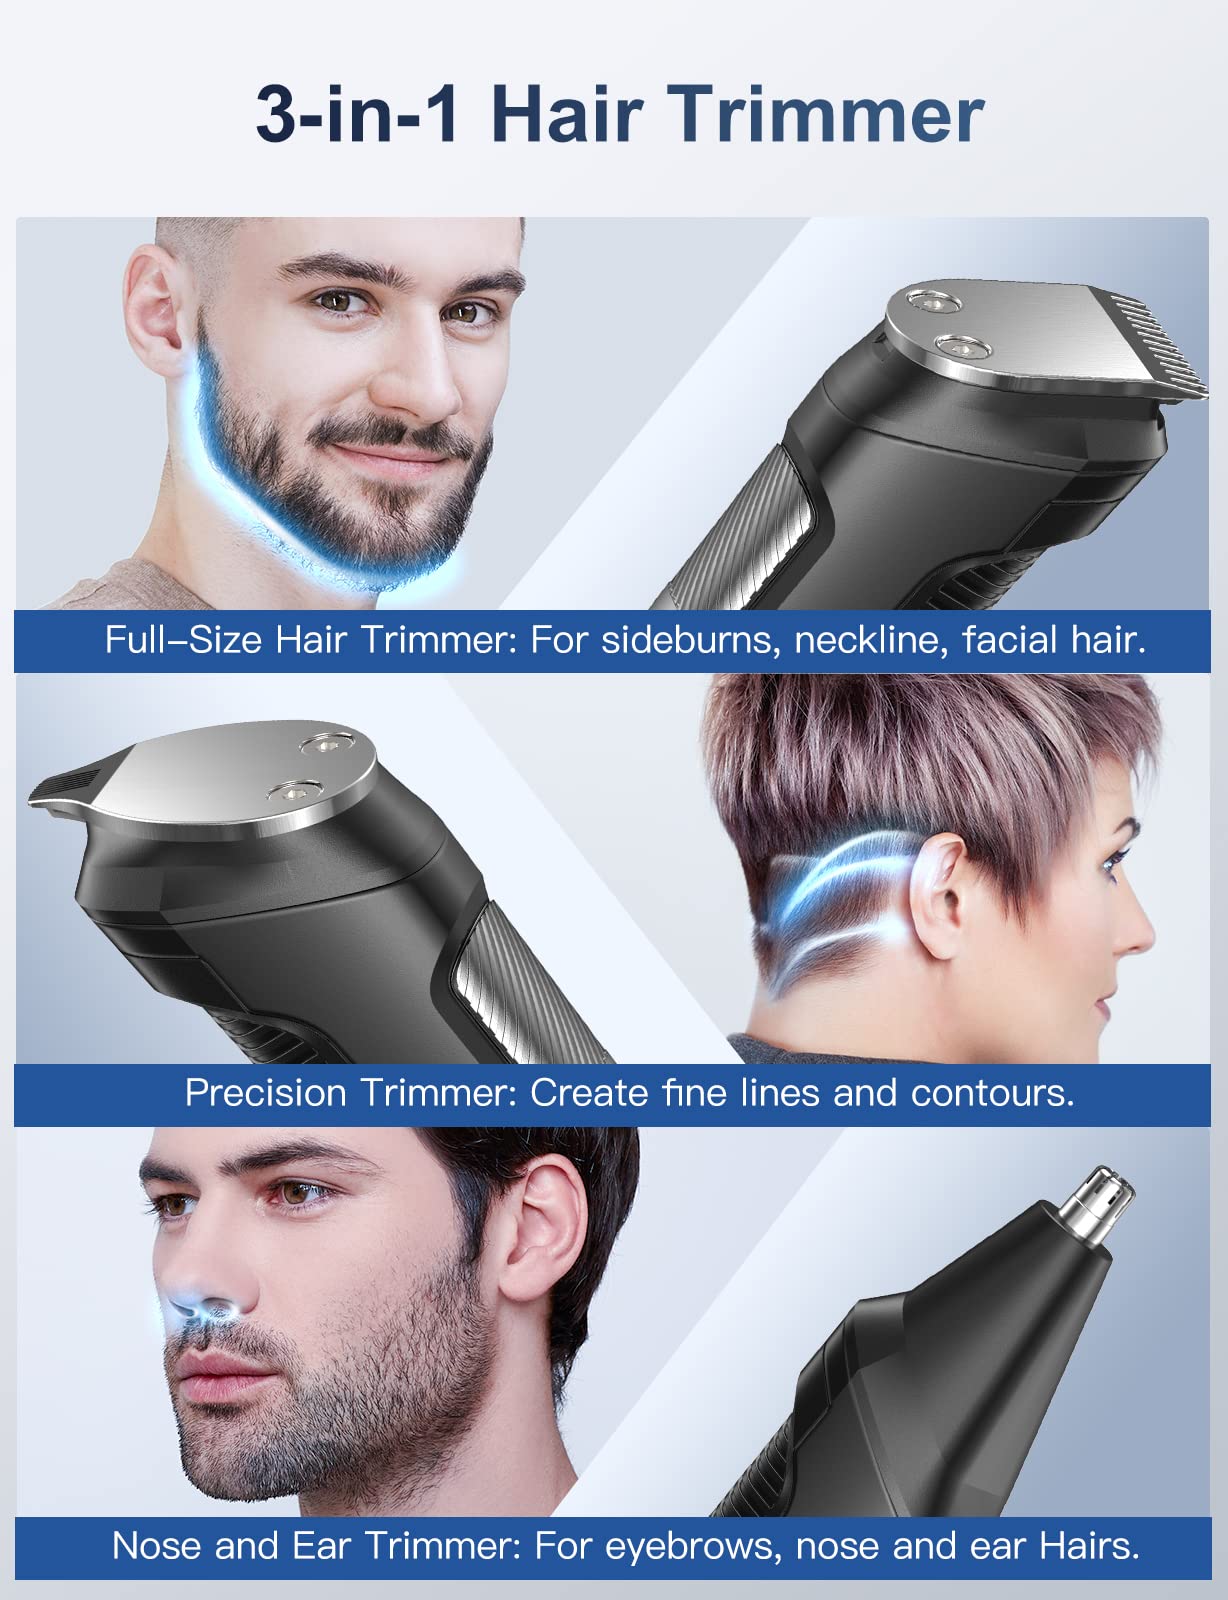 RICAF Beard Trimmer Hair clipper for Men, All-in-One MenAs grooming Kit with cordless Rechargeable Hair TrimmerANoseATrimmerAElectricA